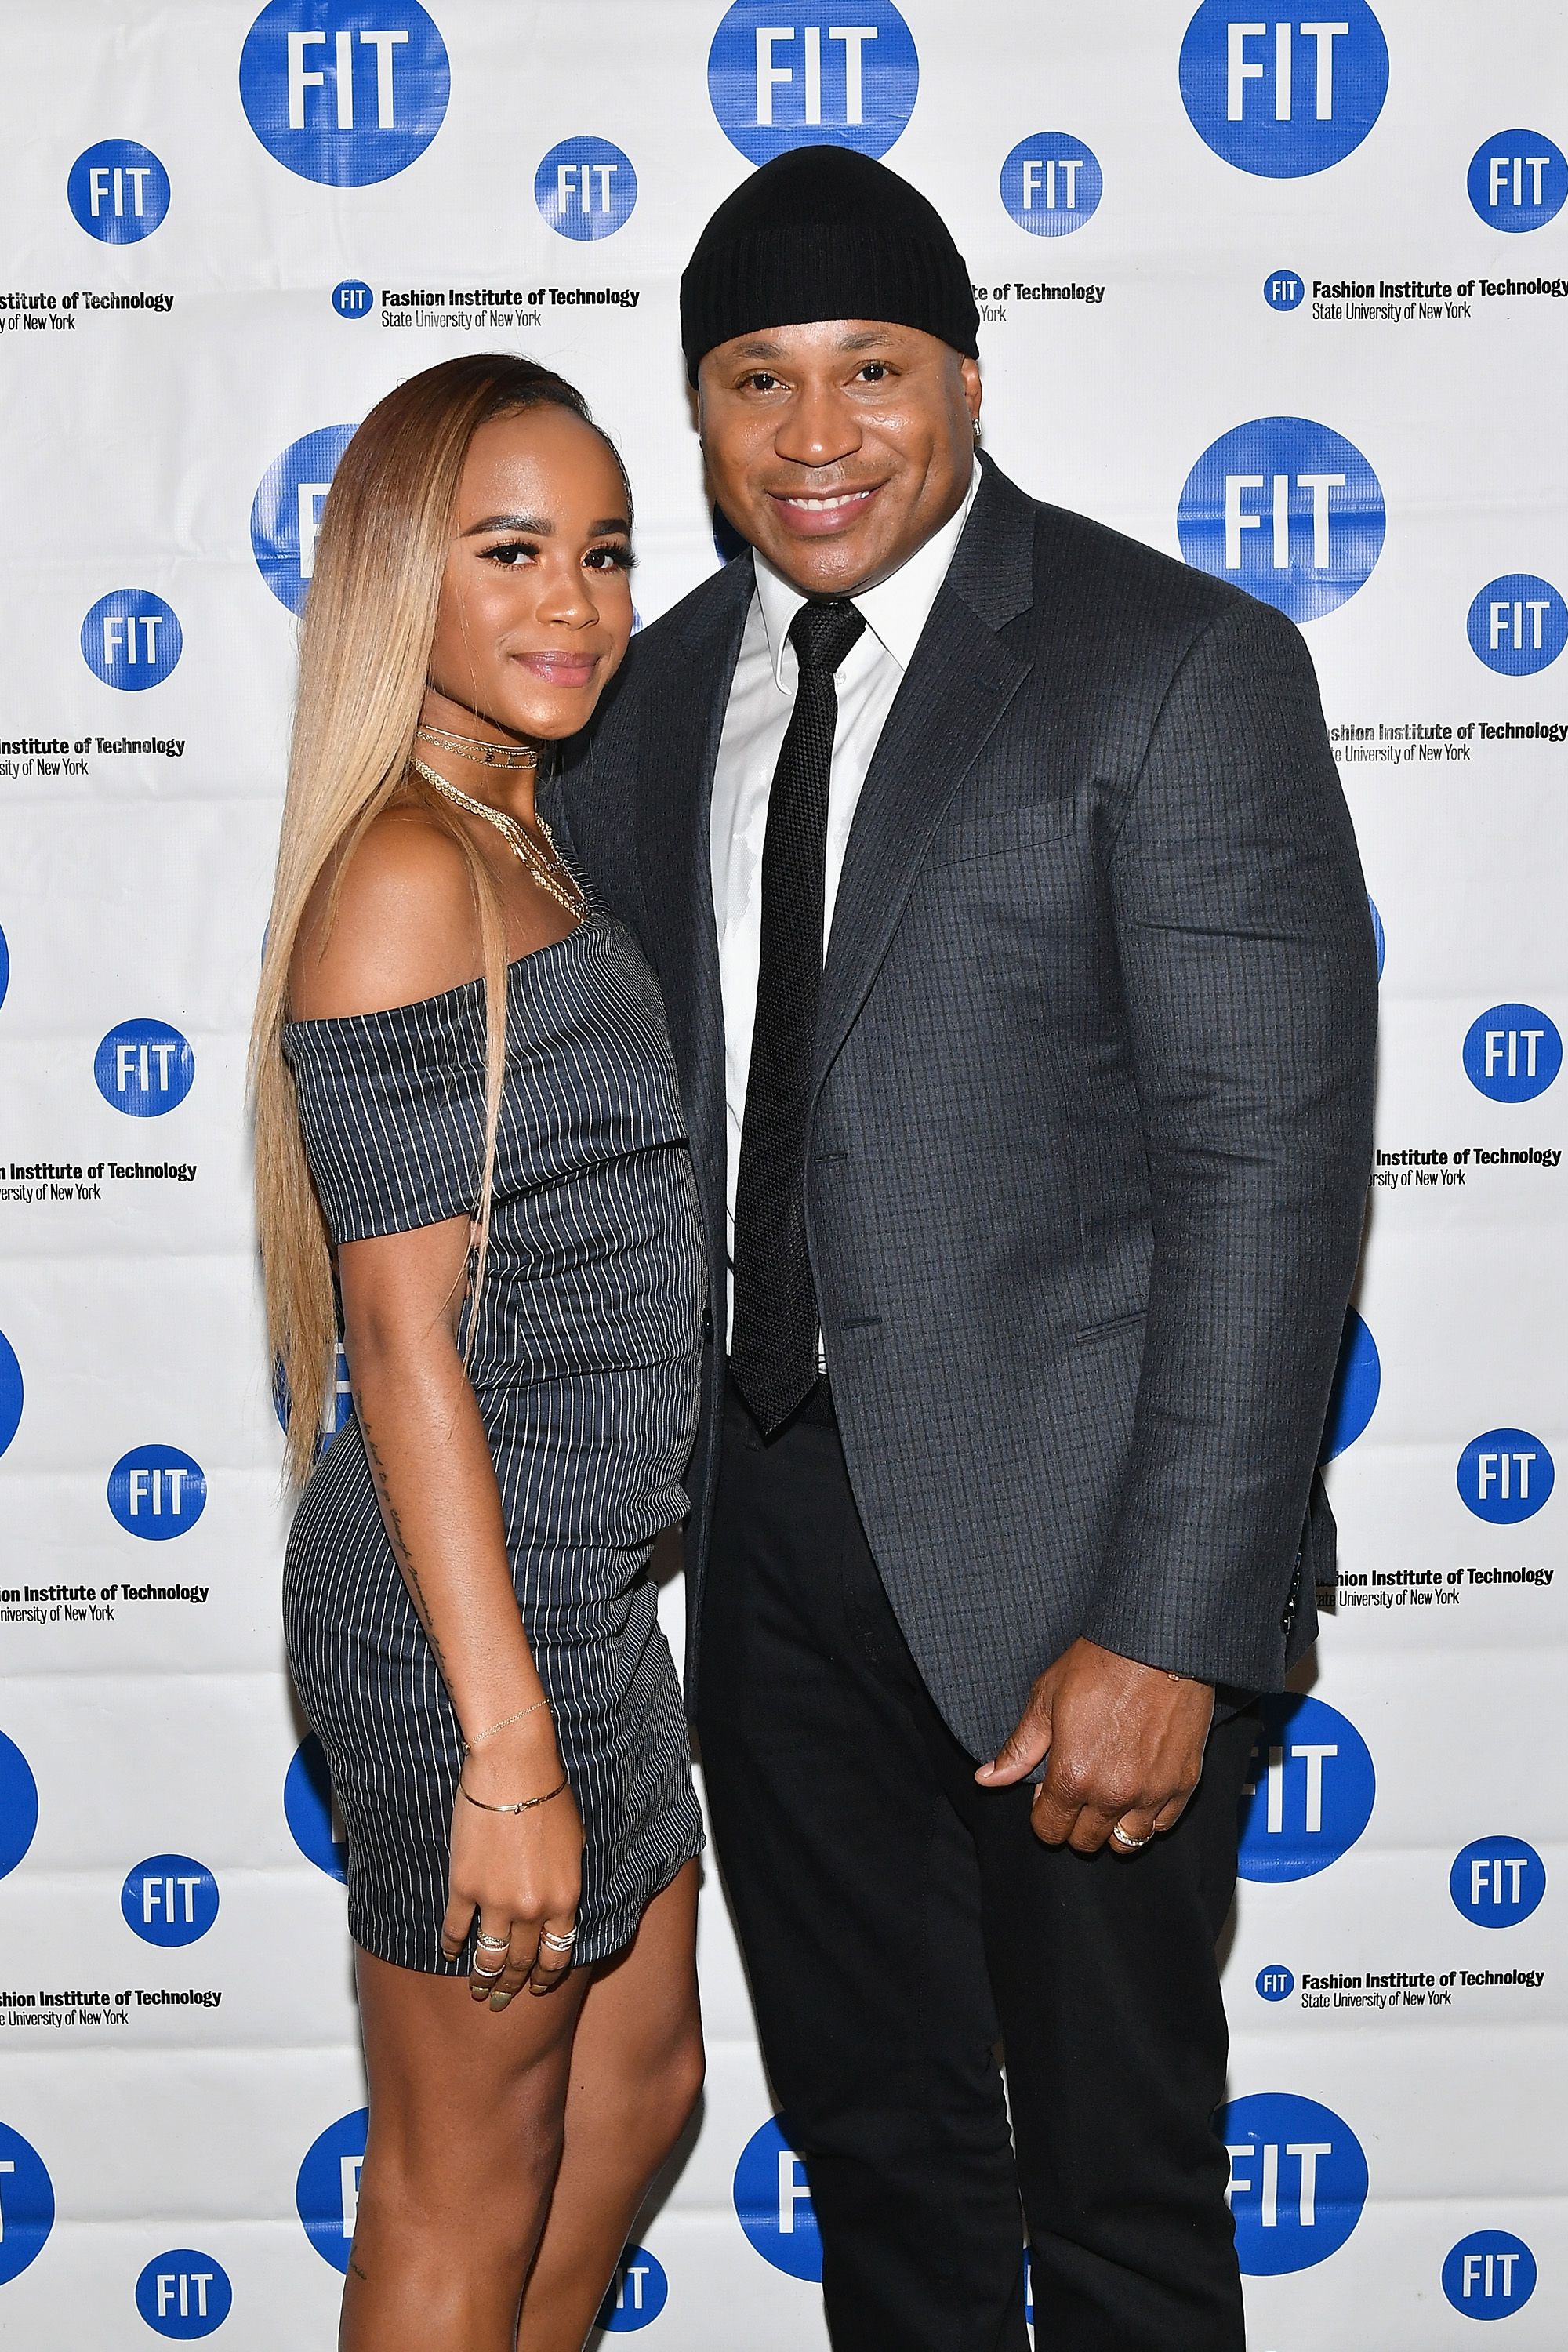 Samaria Leah Smith and LL Cool J at the FIT's 2017 Commencement Ceremony on May 25, 2017 | Photo: Getty Images